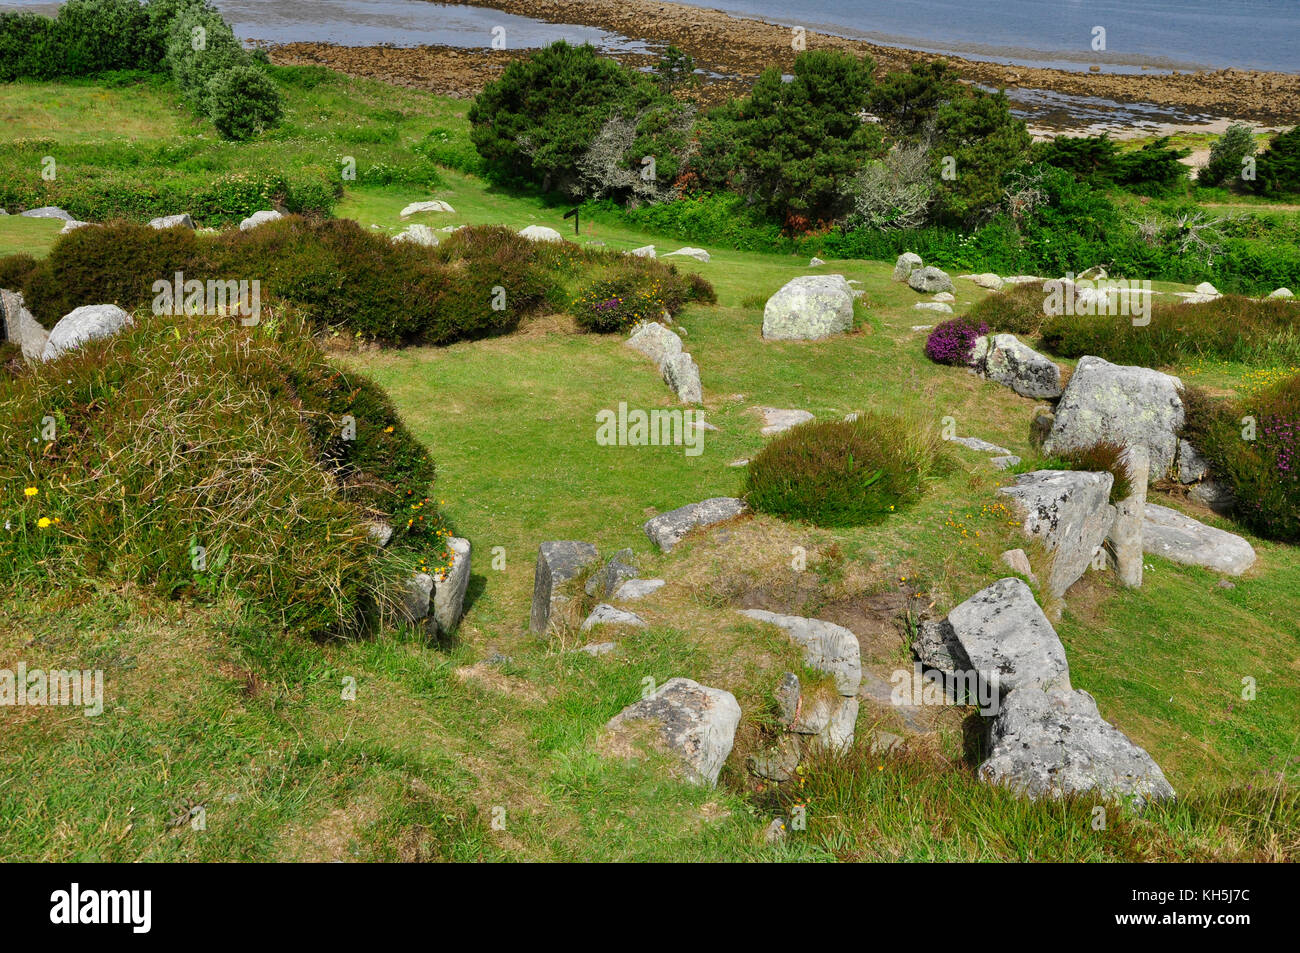 Halangy Down Ancient village,a Iron Age to Roman settlement,Neolithic 2500BC,overlooking the sea on St Mary's, Isles of Scilly, Cornwall, UK Stock Photo